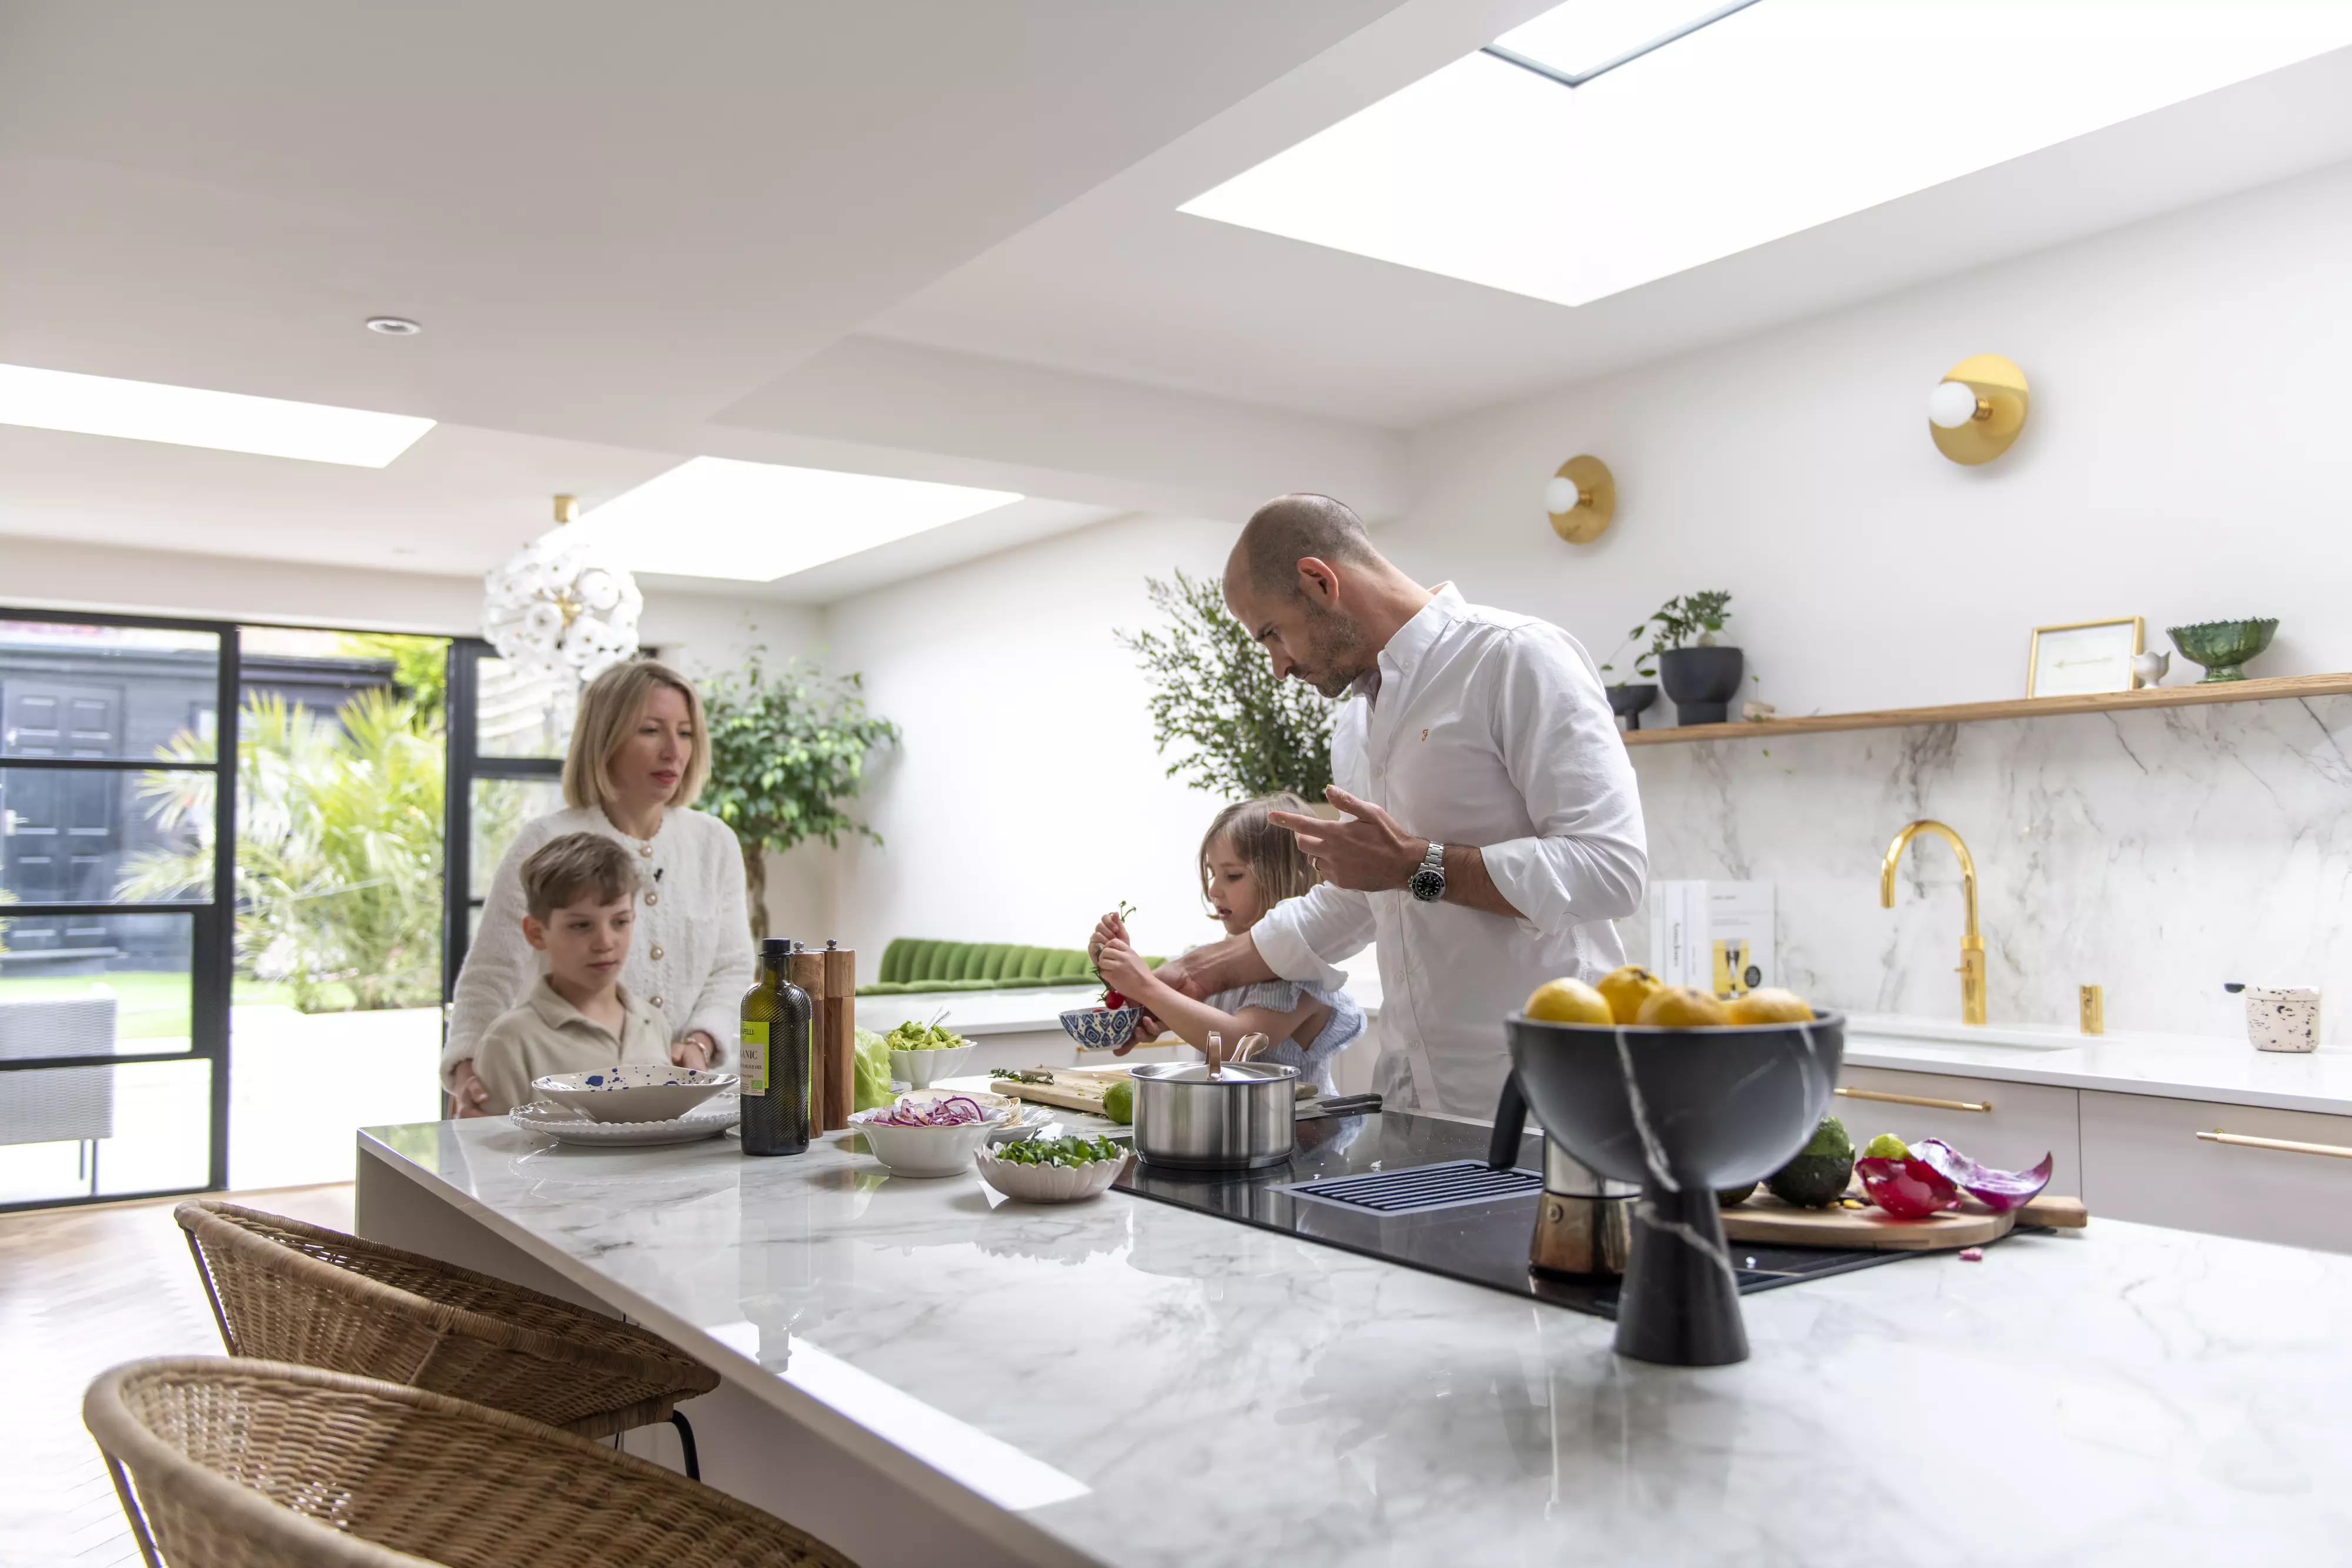 Modern kitchen with VELUX skylight, family cooking together, marble worktops.